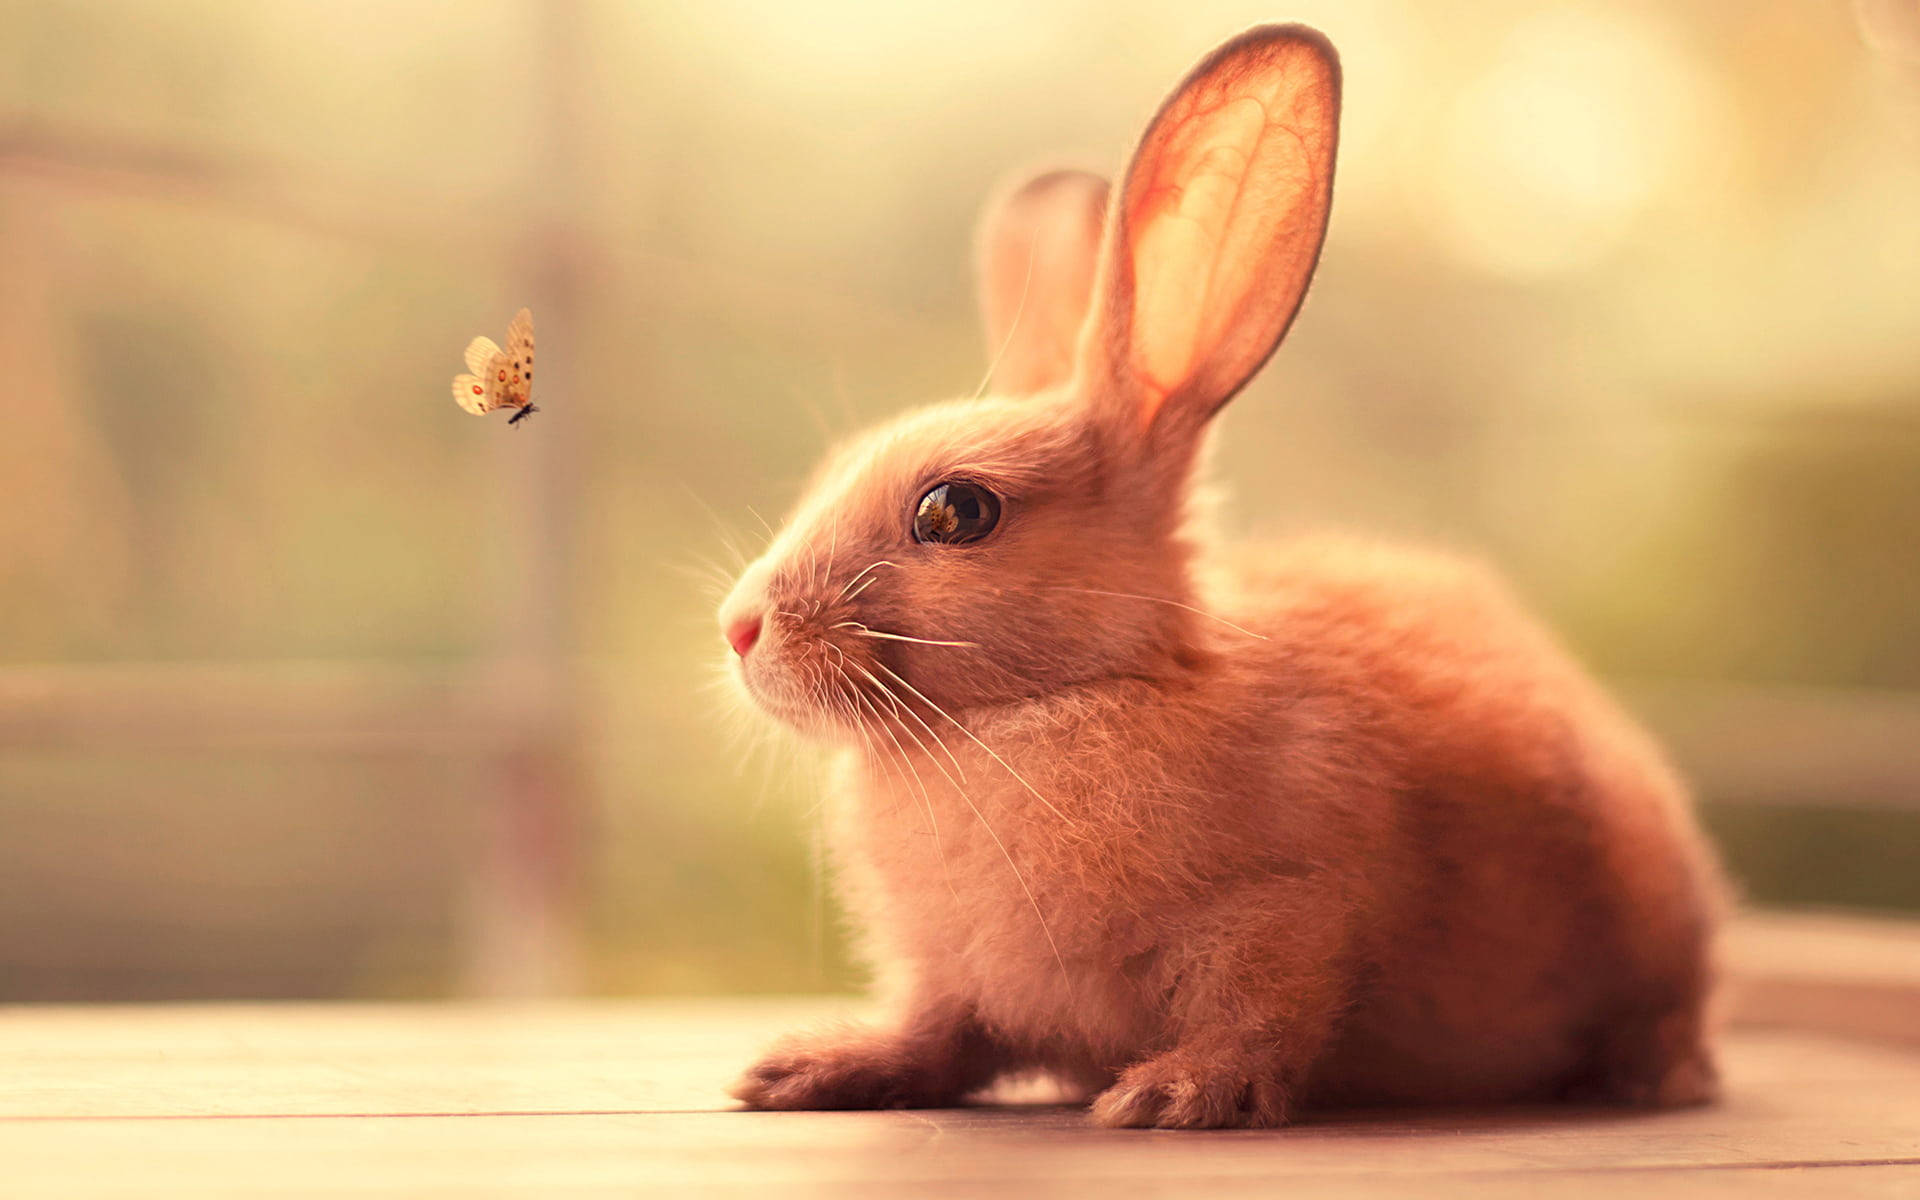 Free Cute Bunny Wallpaper Downloads, [100+] Cute Bunny Wallpapers for FREE  